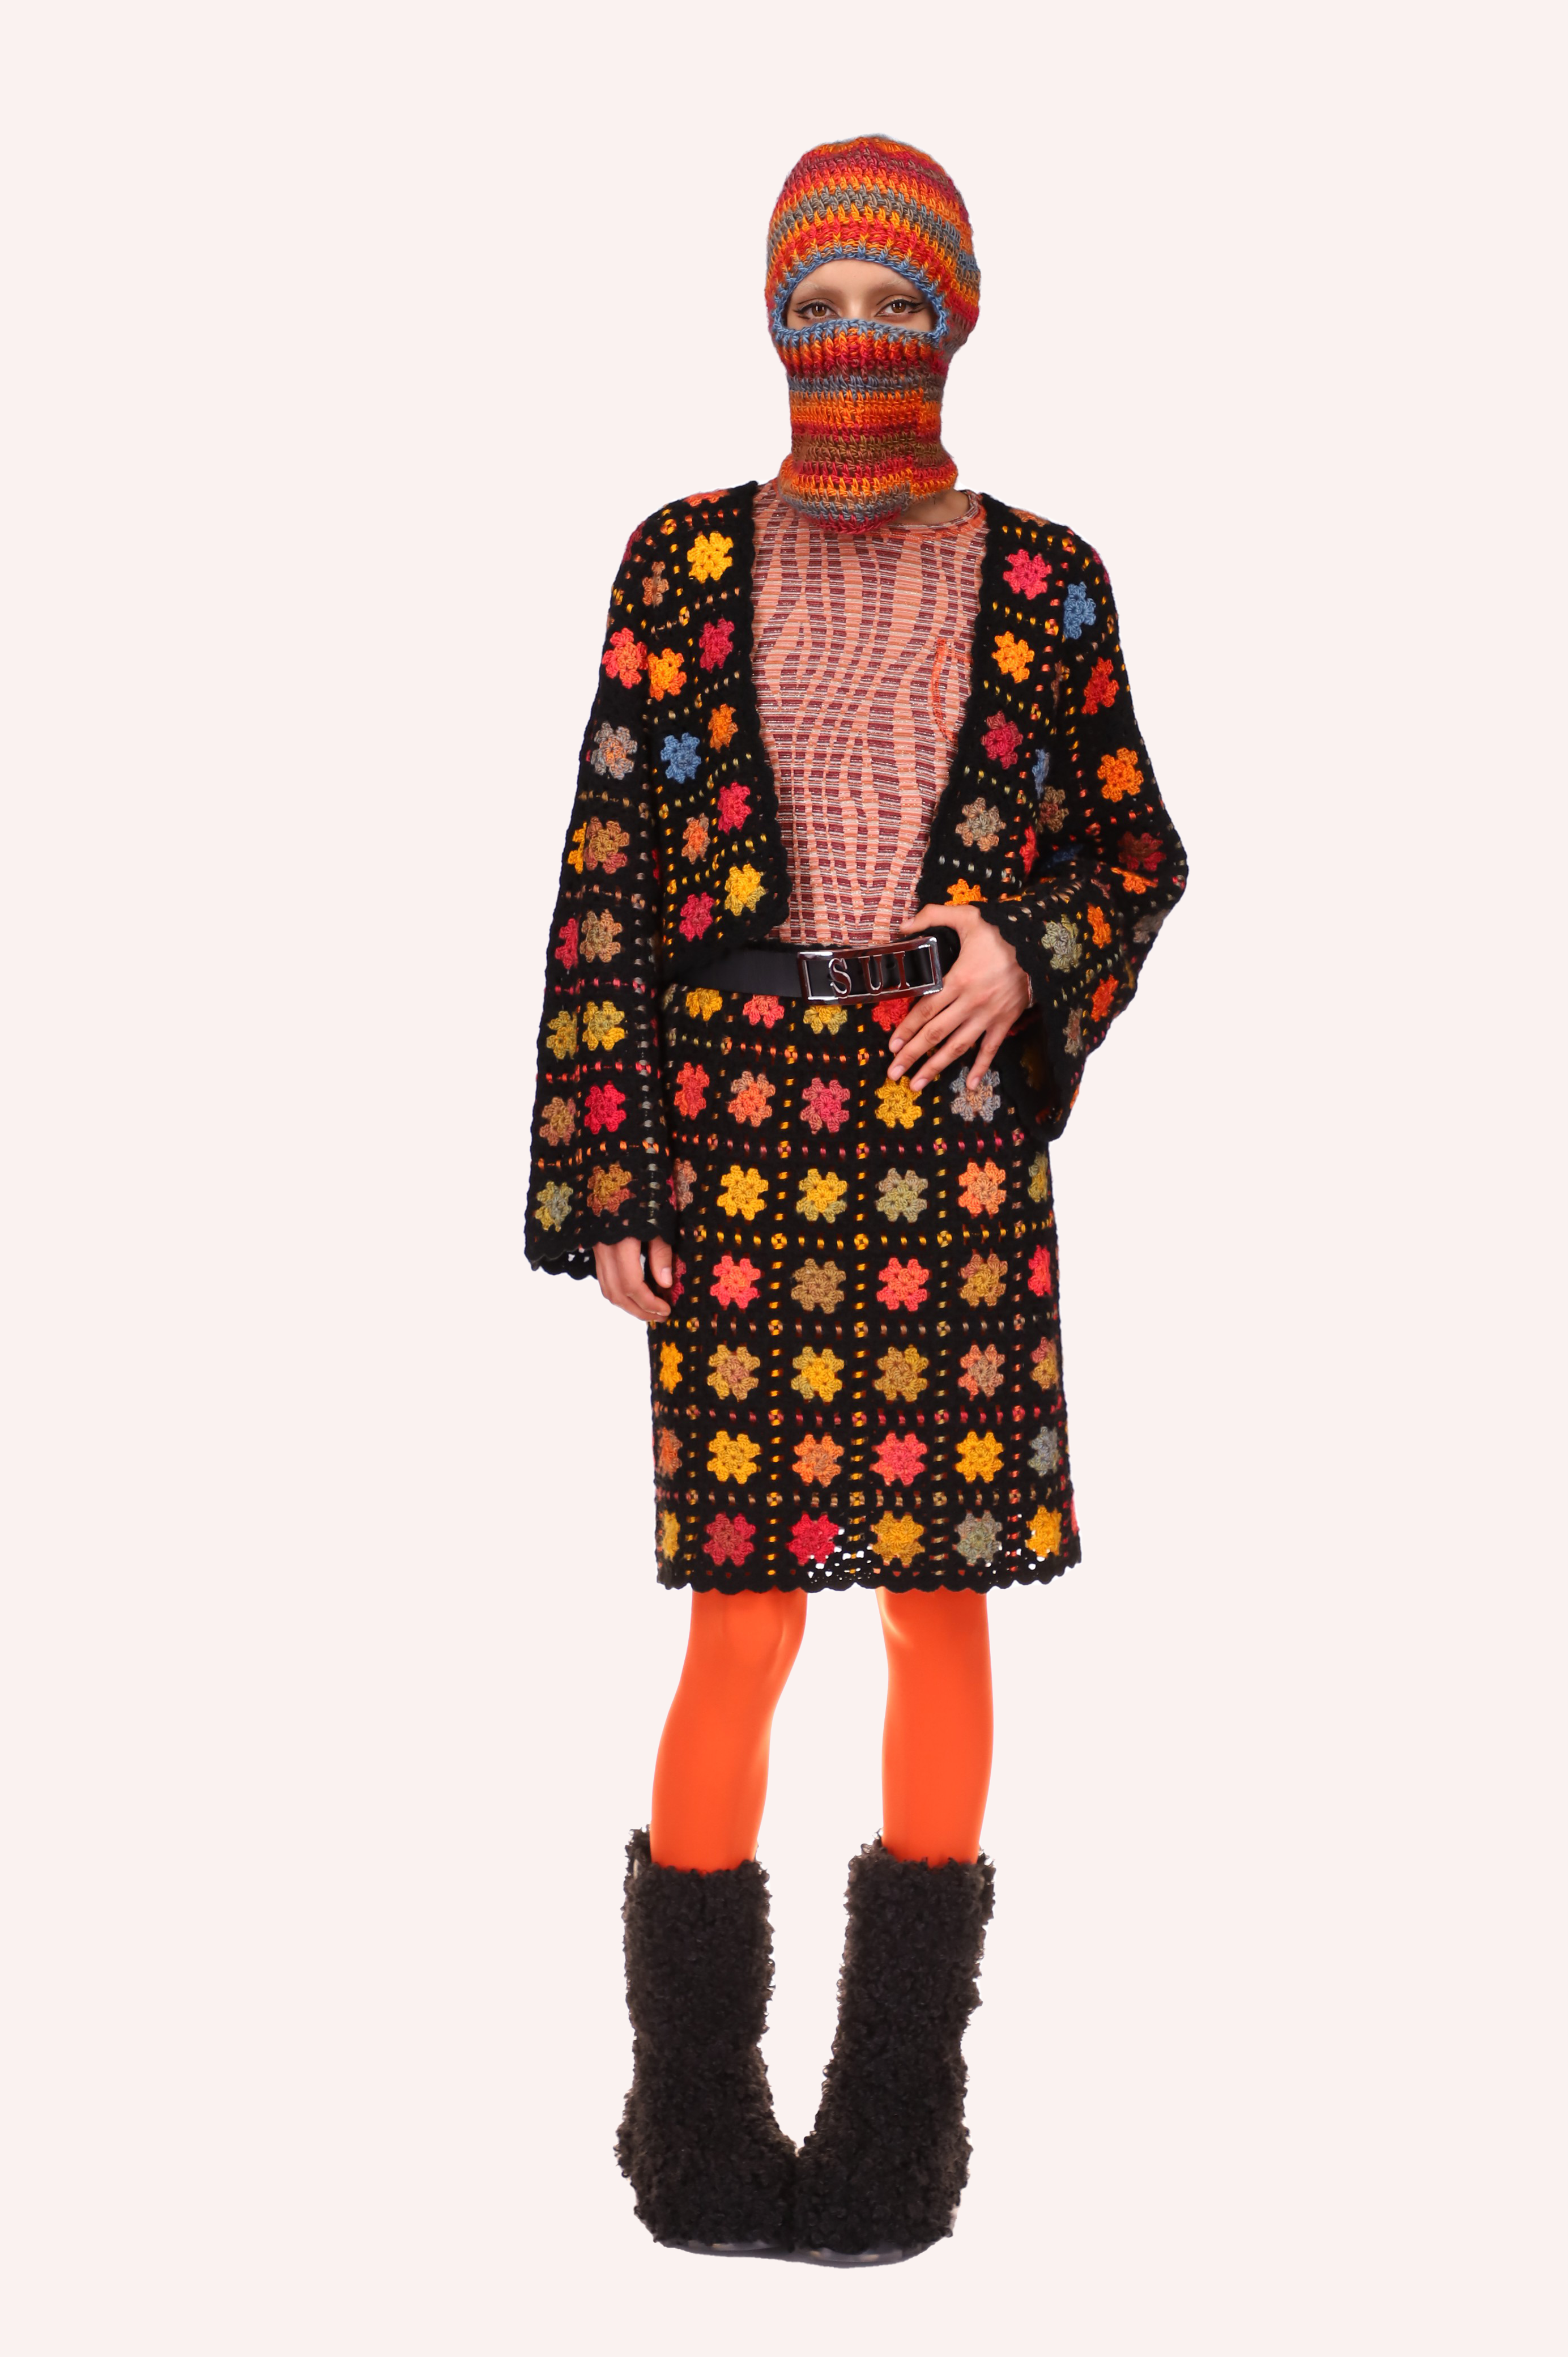 In squares of orange dots, stars like design are against a black background for the Stainglass Crochet Cardigan 